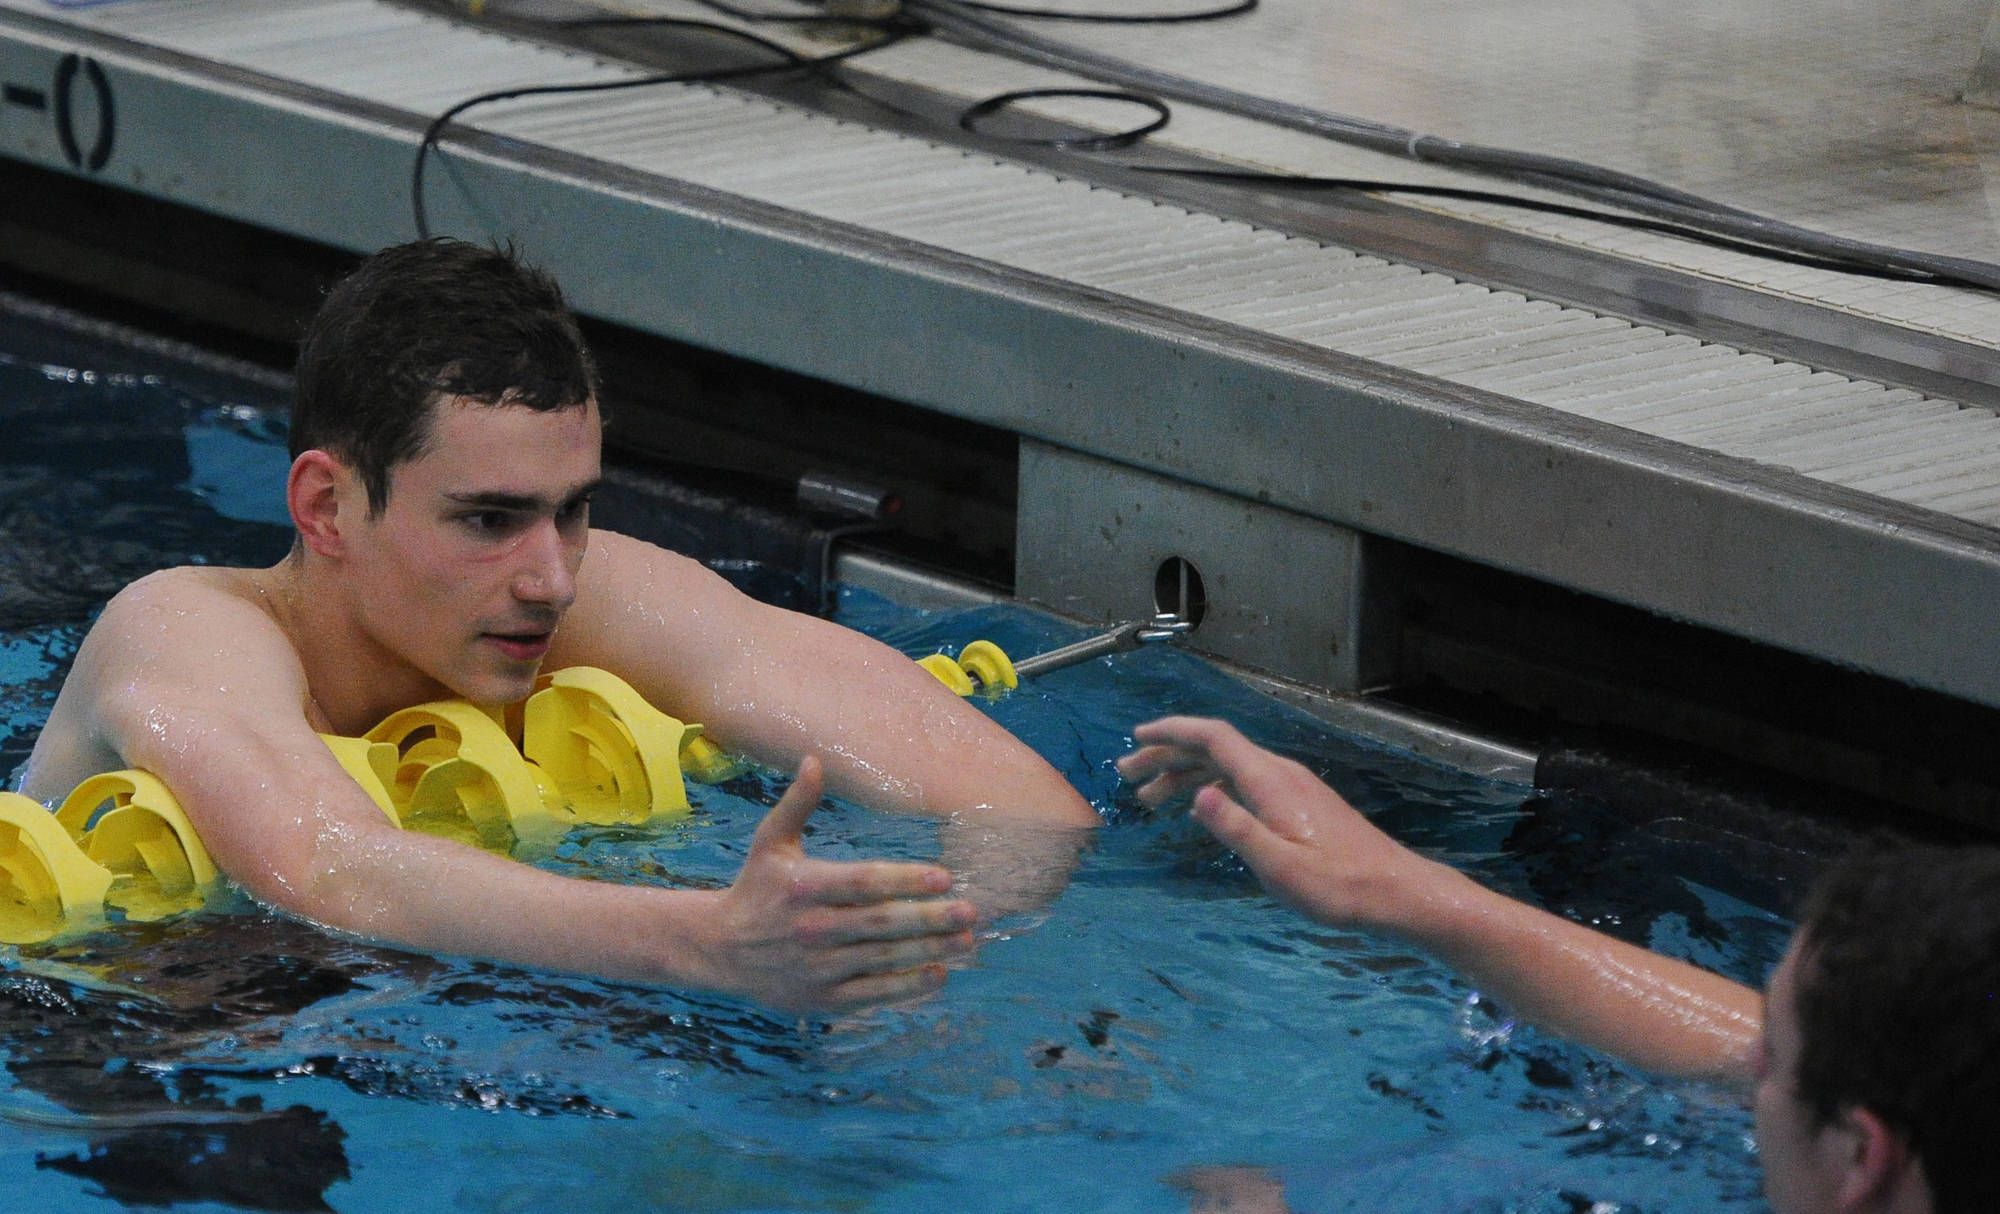 Thunder Mountain High School senior Raymie Matiashowski (second place, 4:52.83) congratulates teammate Micah Grigg (sixth place, 4:56.97) following the 500-yard freestyle at the ASAA/First National Bank Alaska State Swim and Dive Championships on Saturday, Nov. 3, 2018. The Falcons boys were awarded the team sportsmanship award for the second year in a row at the meet. (Michael Dinneen | For the Juneau Empire)